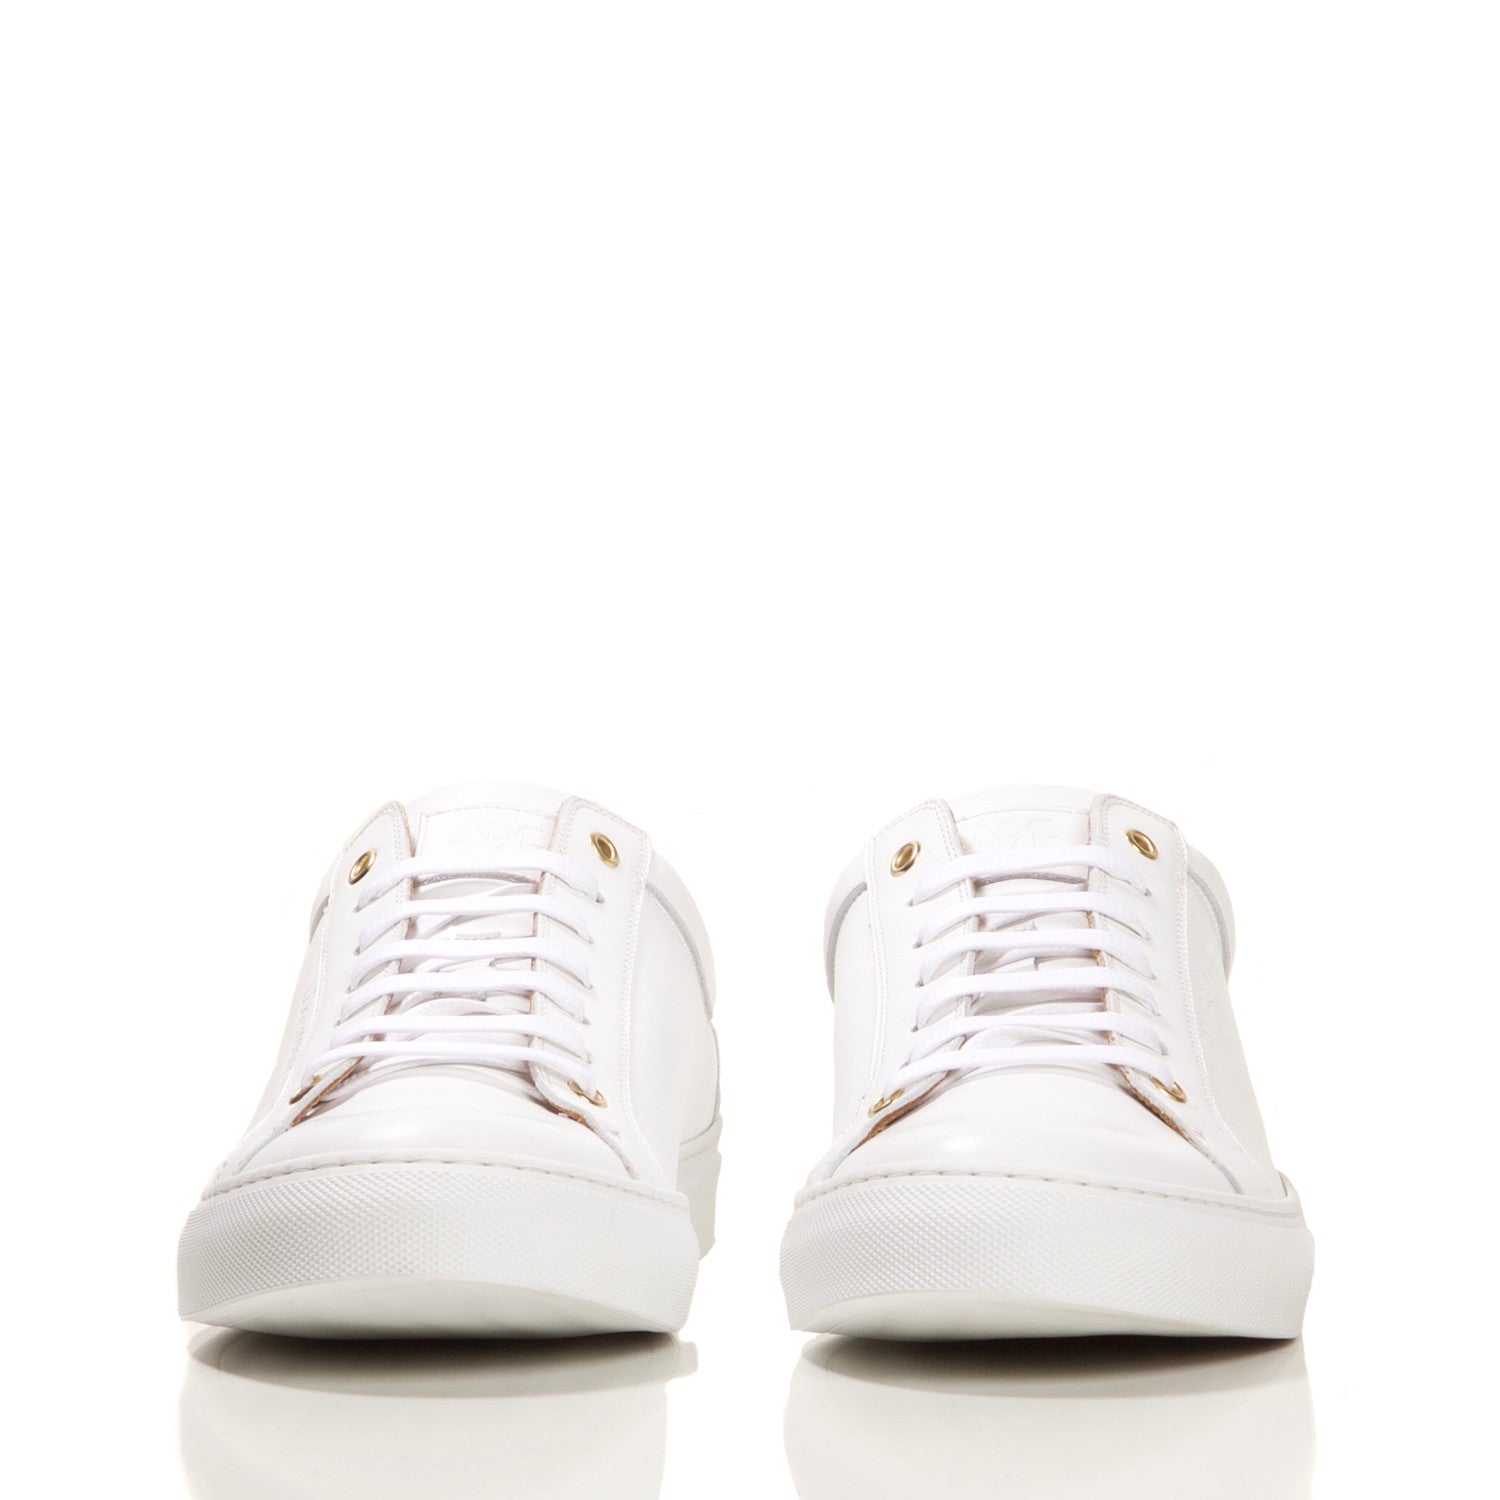 WHITE LOW TOP TAILORED SNEAKER